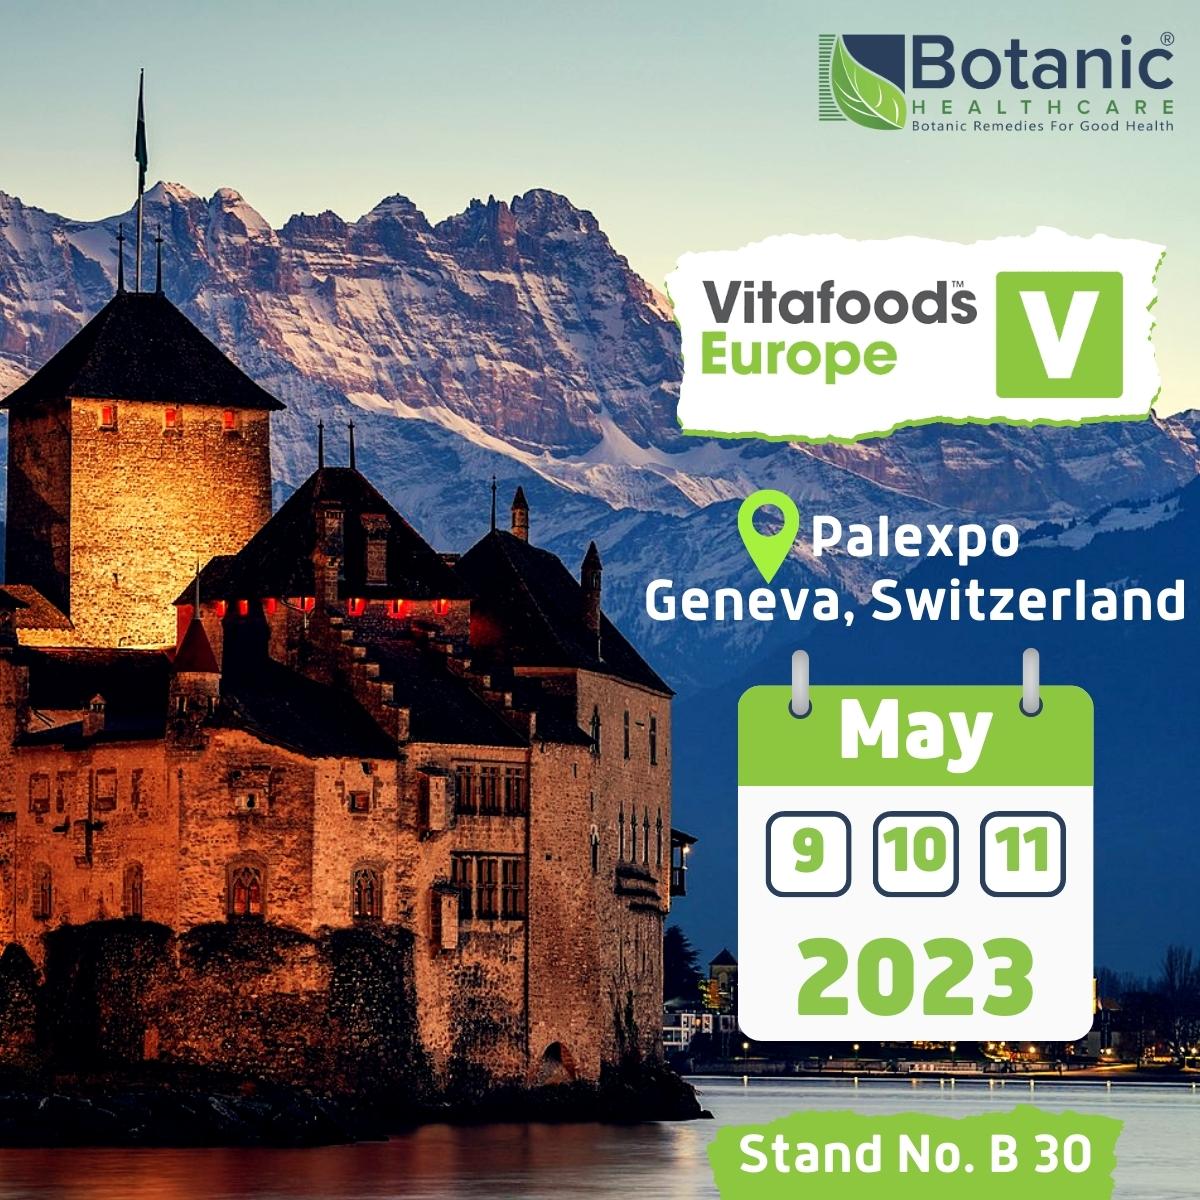 Botanic Healthcare to exhibit at the upcoming event Vitafoods Europe at Geneva, Switzerland from May 9th to May 11th 2023 